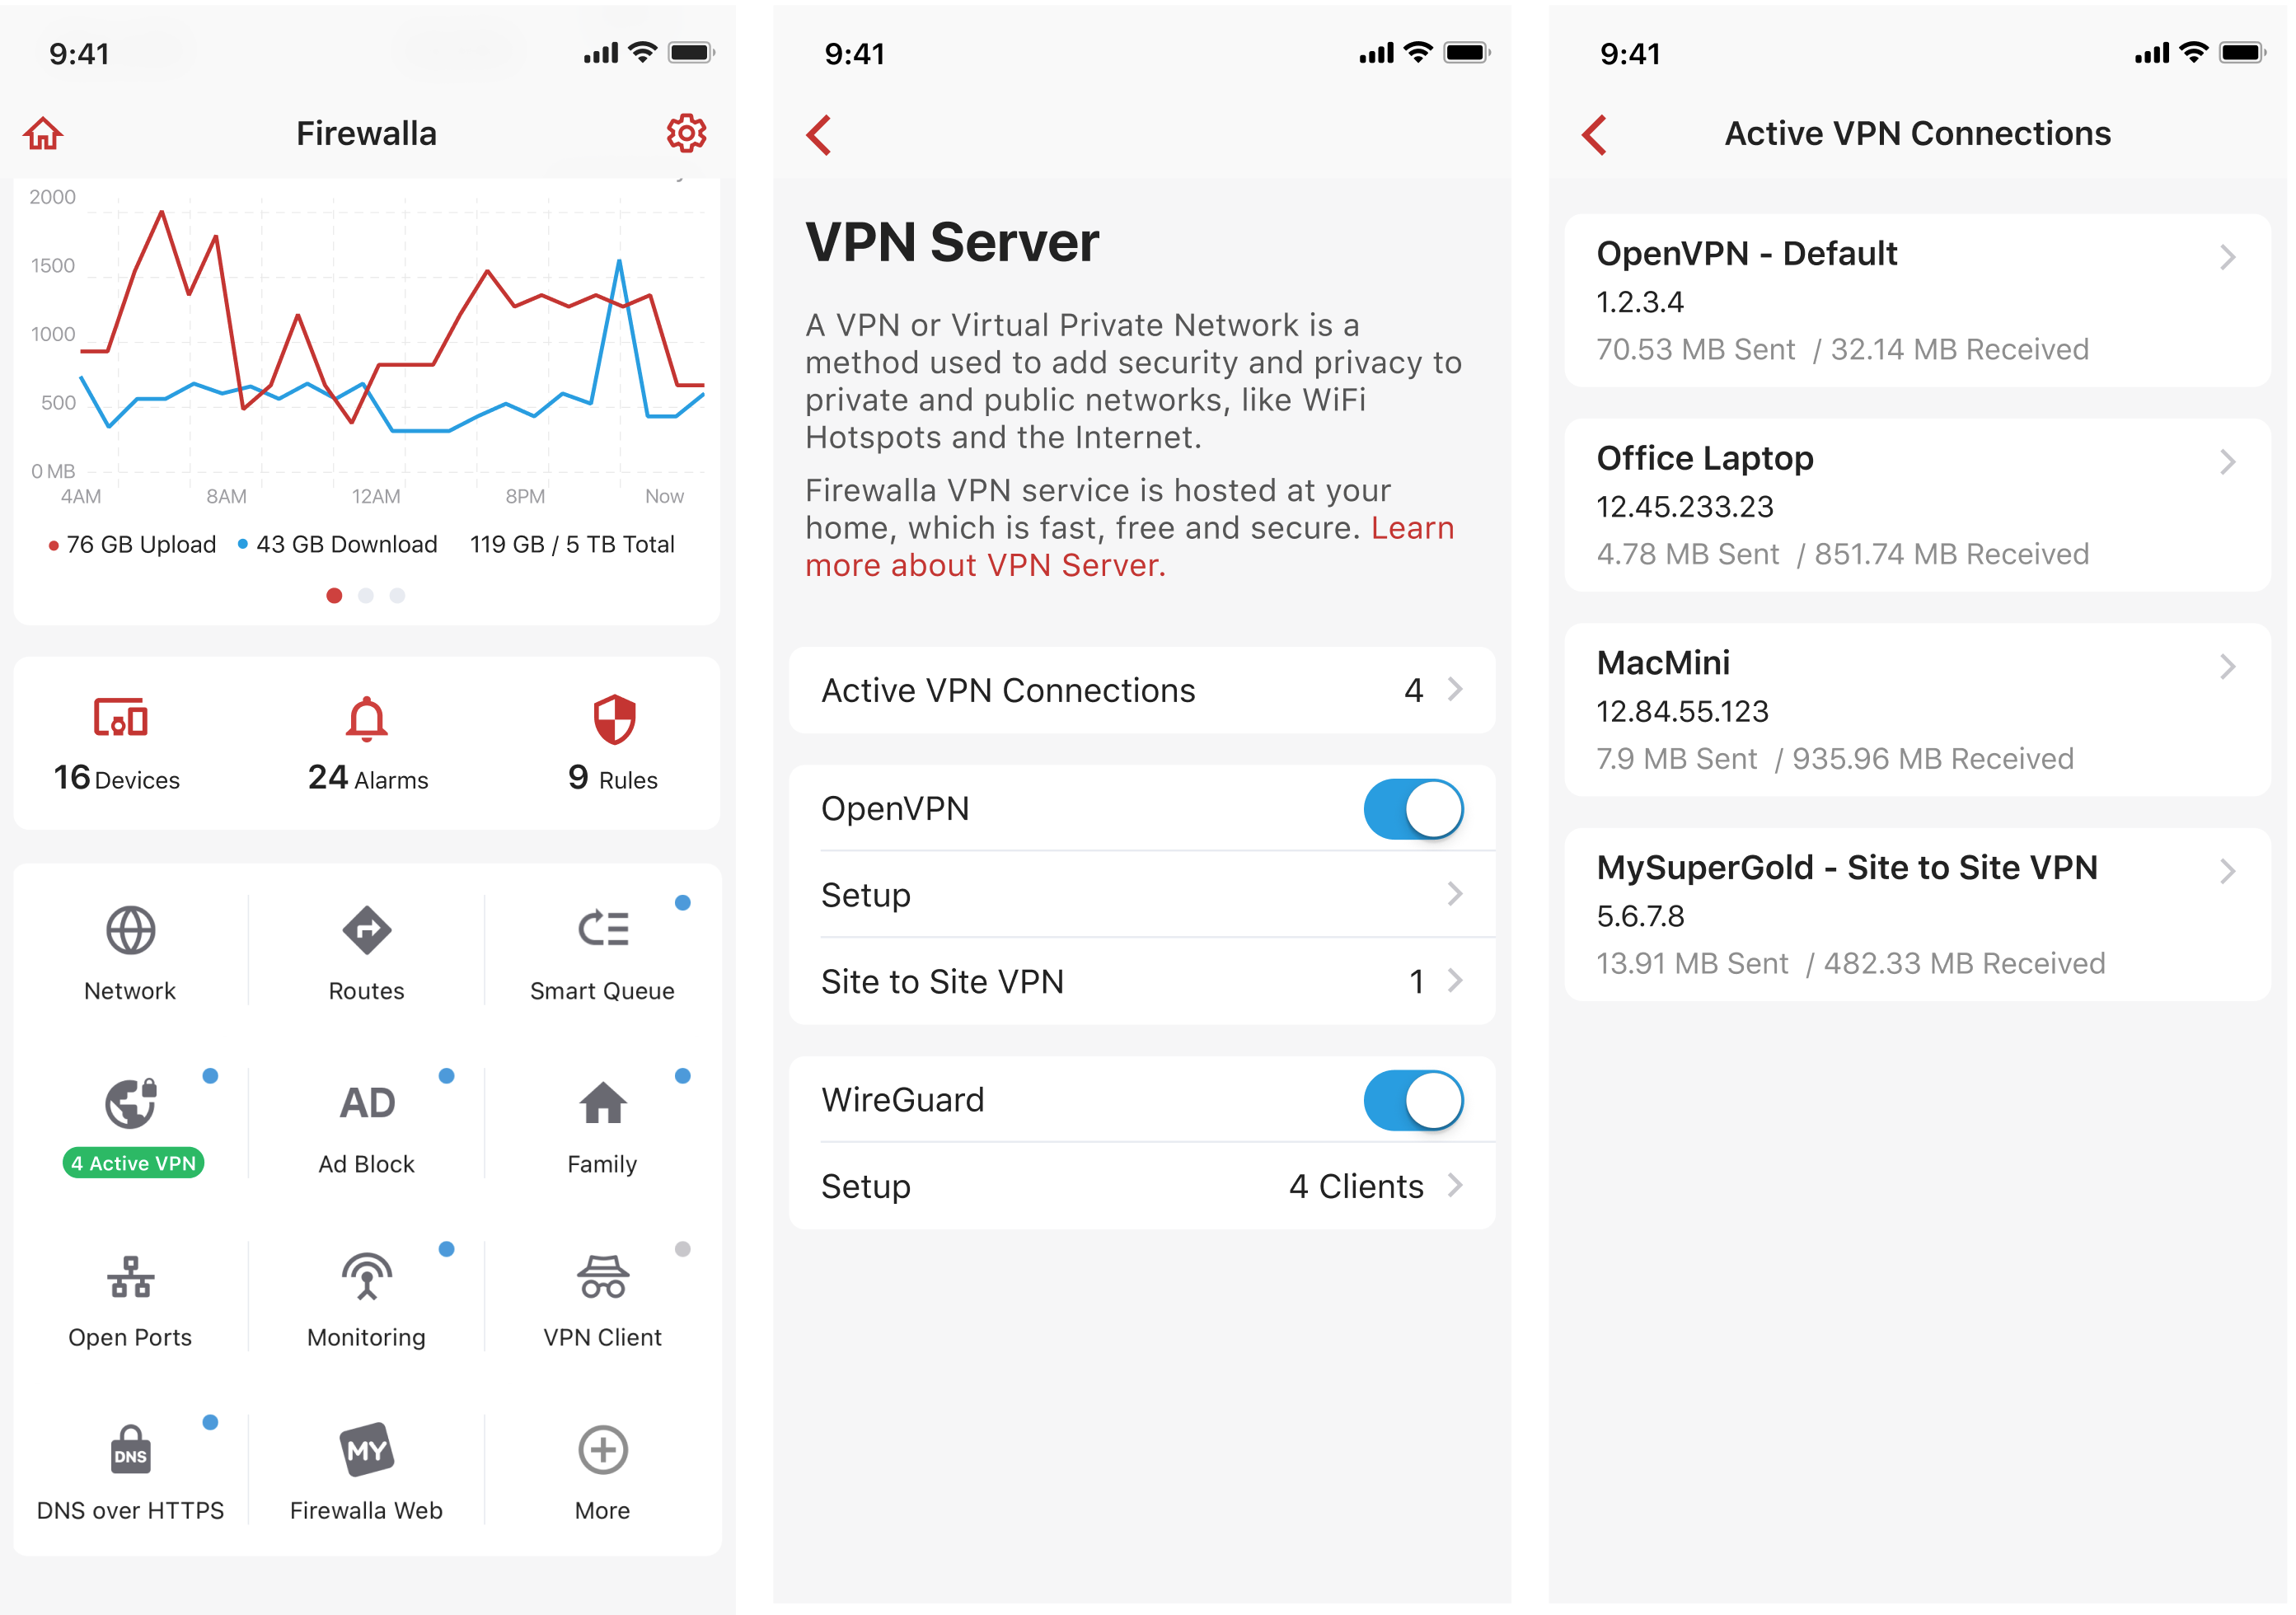 VPN Servers transparency with Active VPN Connections